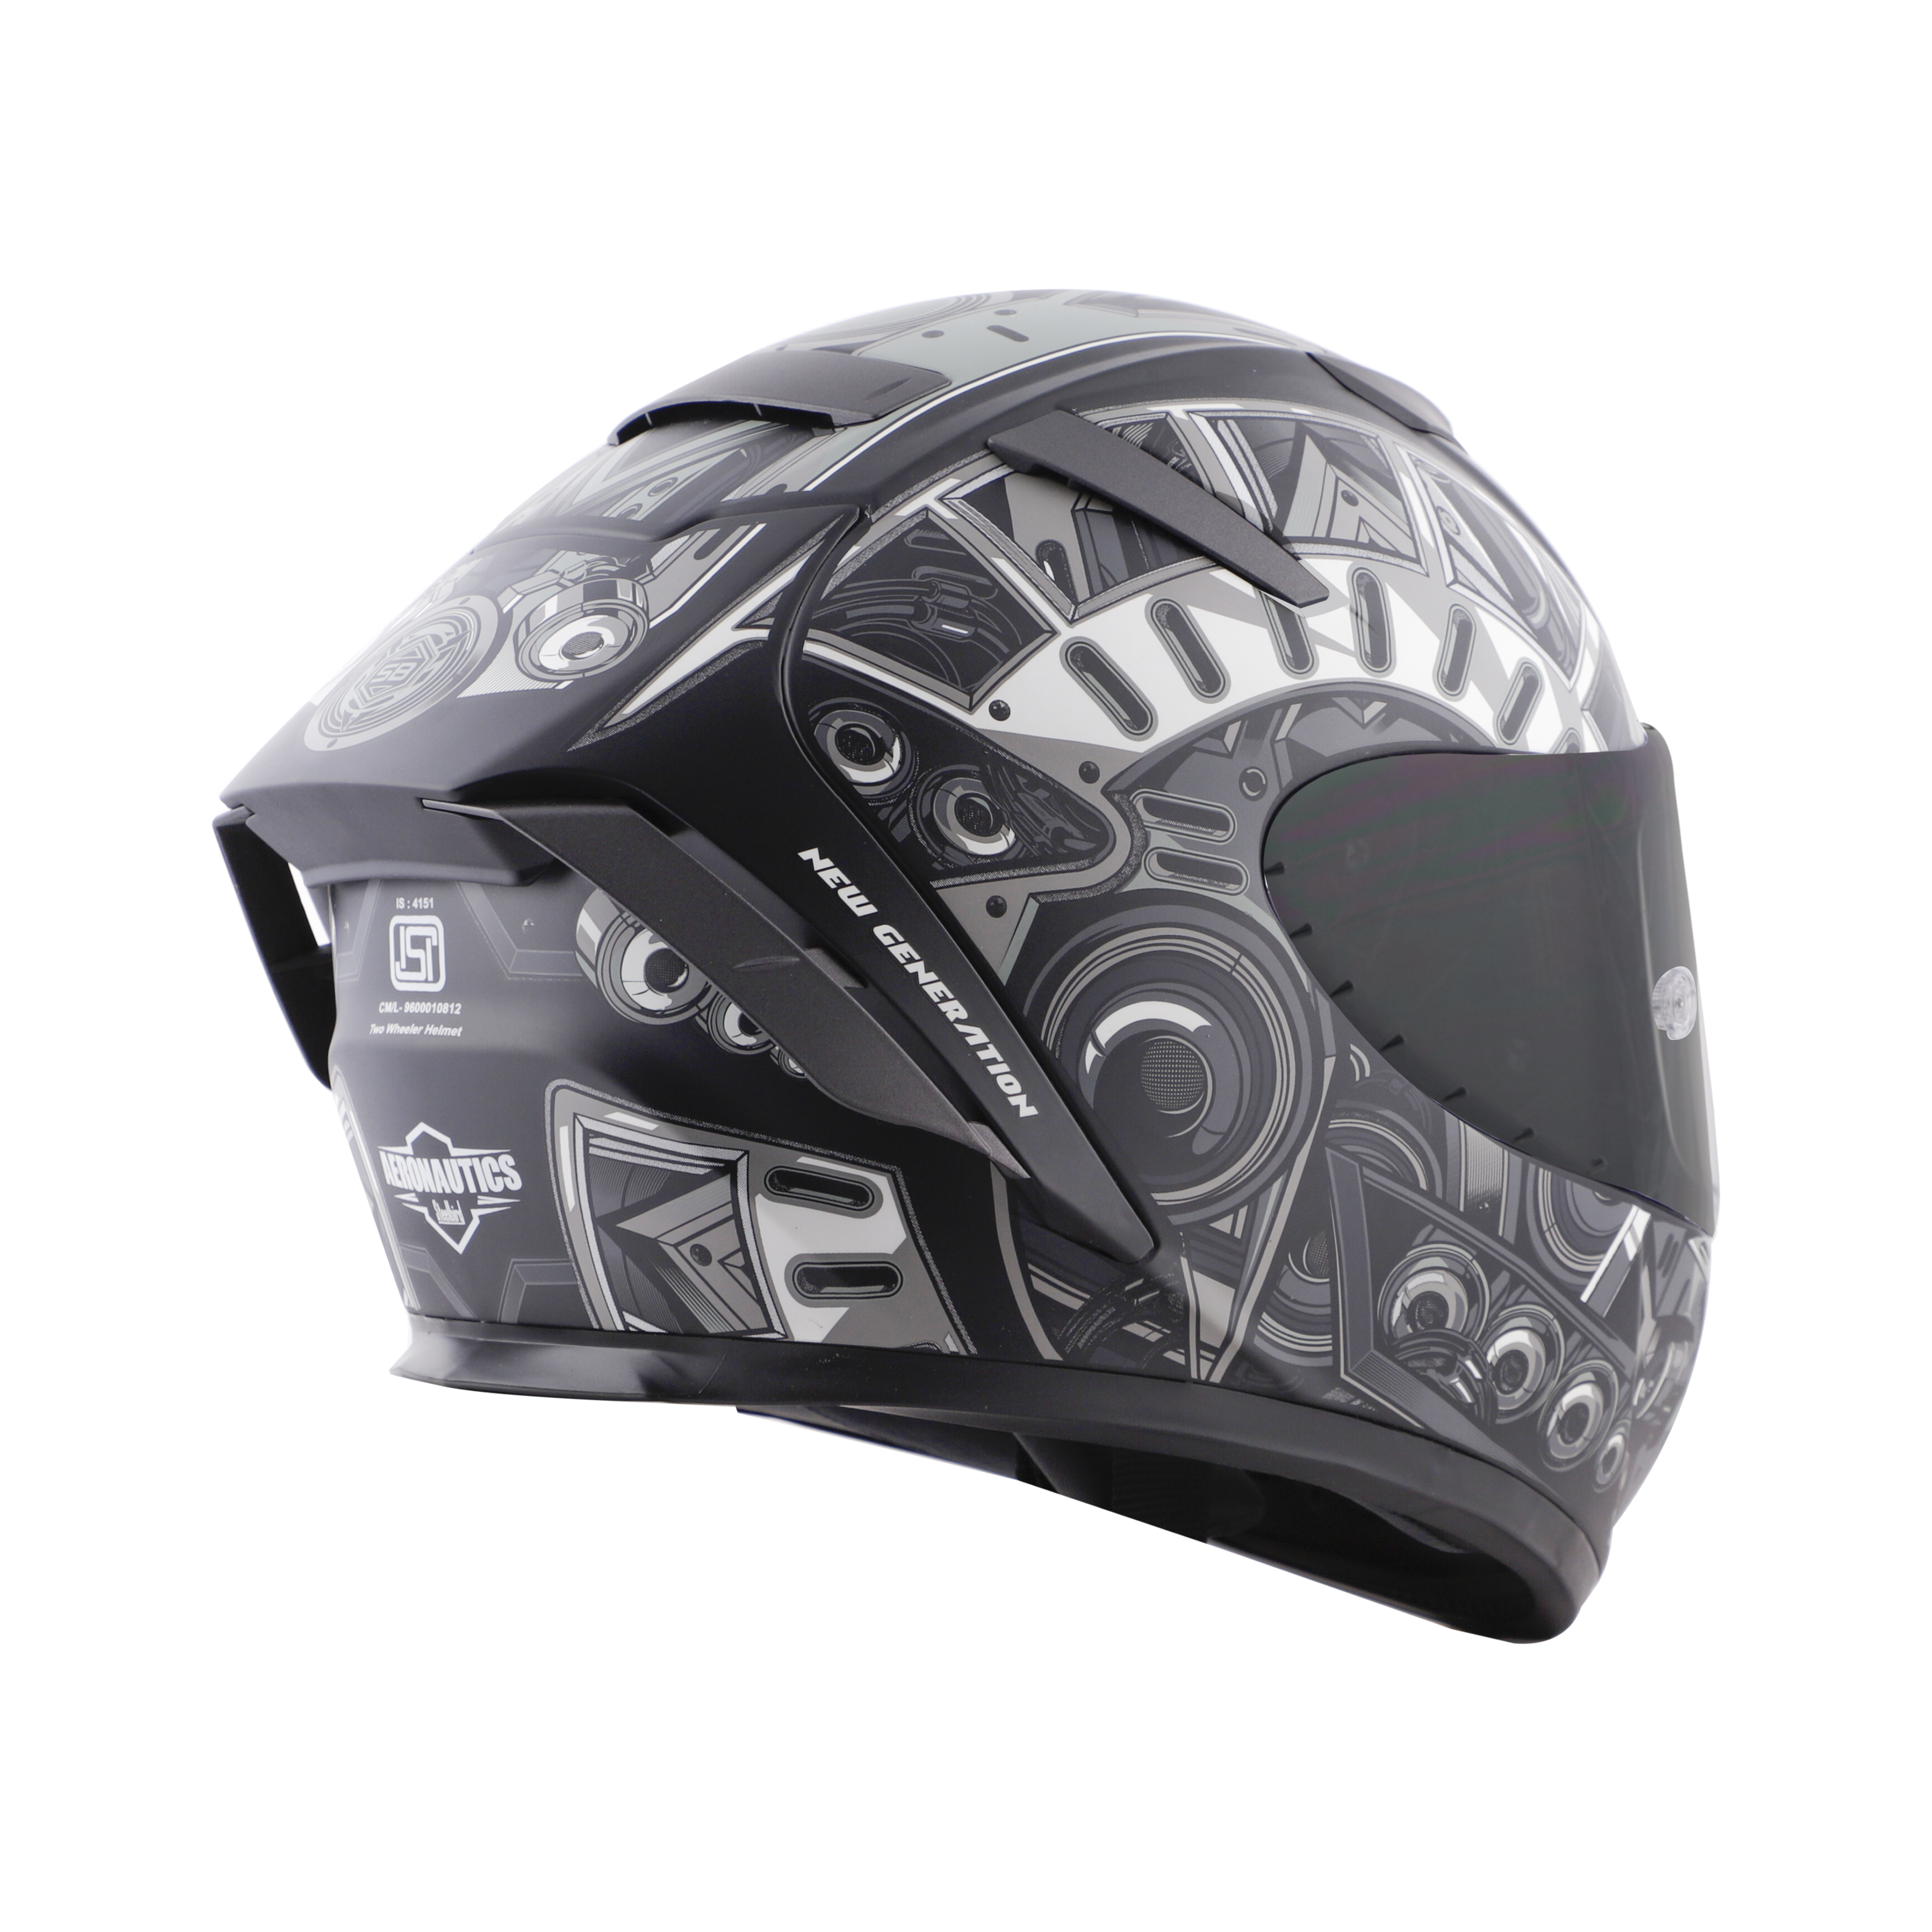 SA-2 TERMINATOR 2.0 MAT BLACK WITH GREY FITTED WITH CLEAR VISOR EXTRA SMOKE VISOR FREE (WITH ANTI-FOG SHIELD HOLDER)